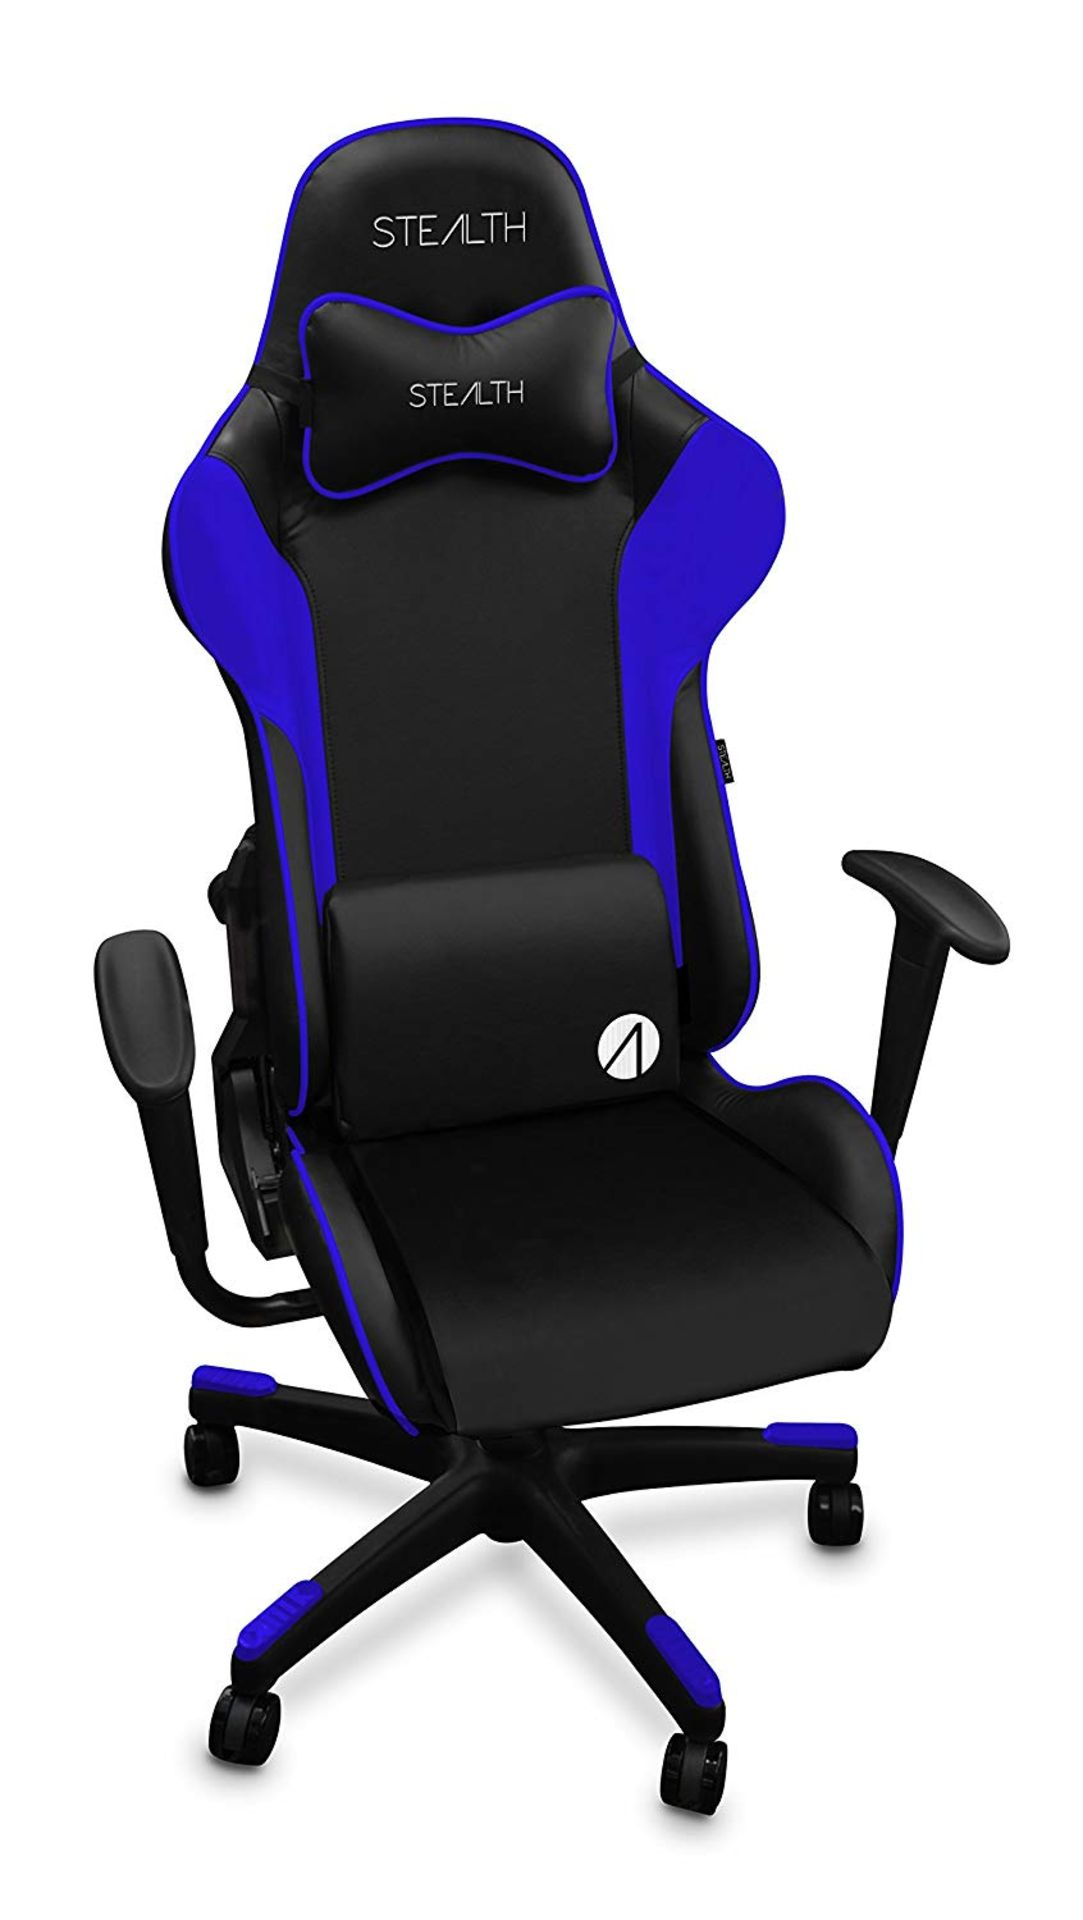 8 x STEALTH Challenger Series Advanced Gaming Chair Maximum Comfort - Blue | @ RRP £ 111.28